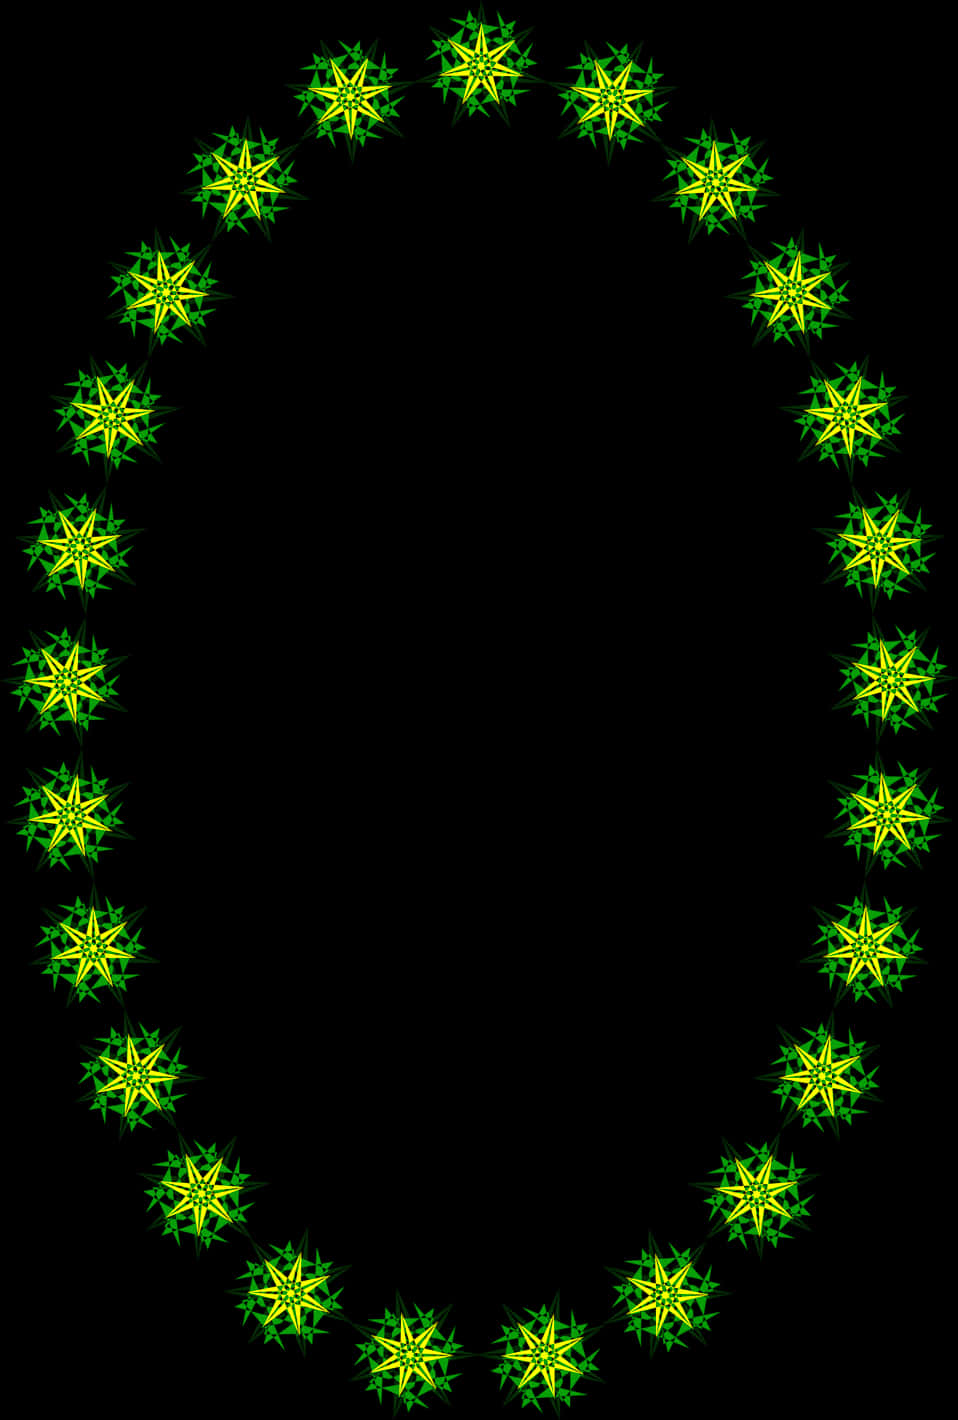 A Green And Yellow Star Shaped Frame